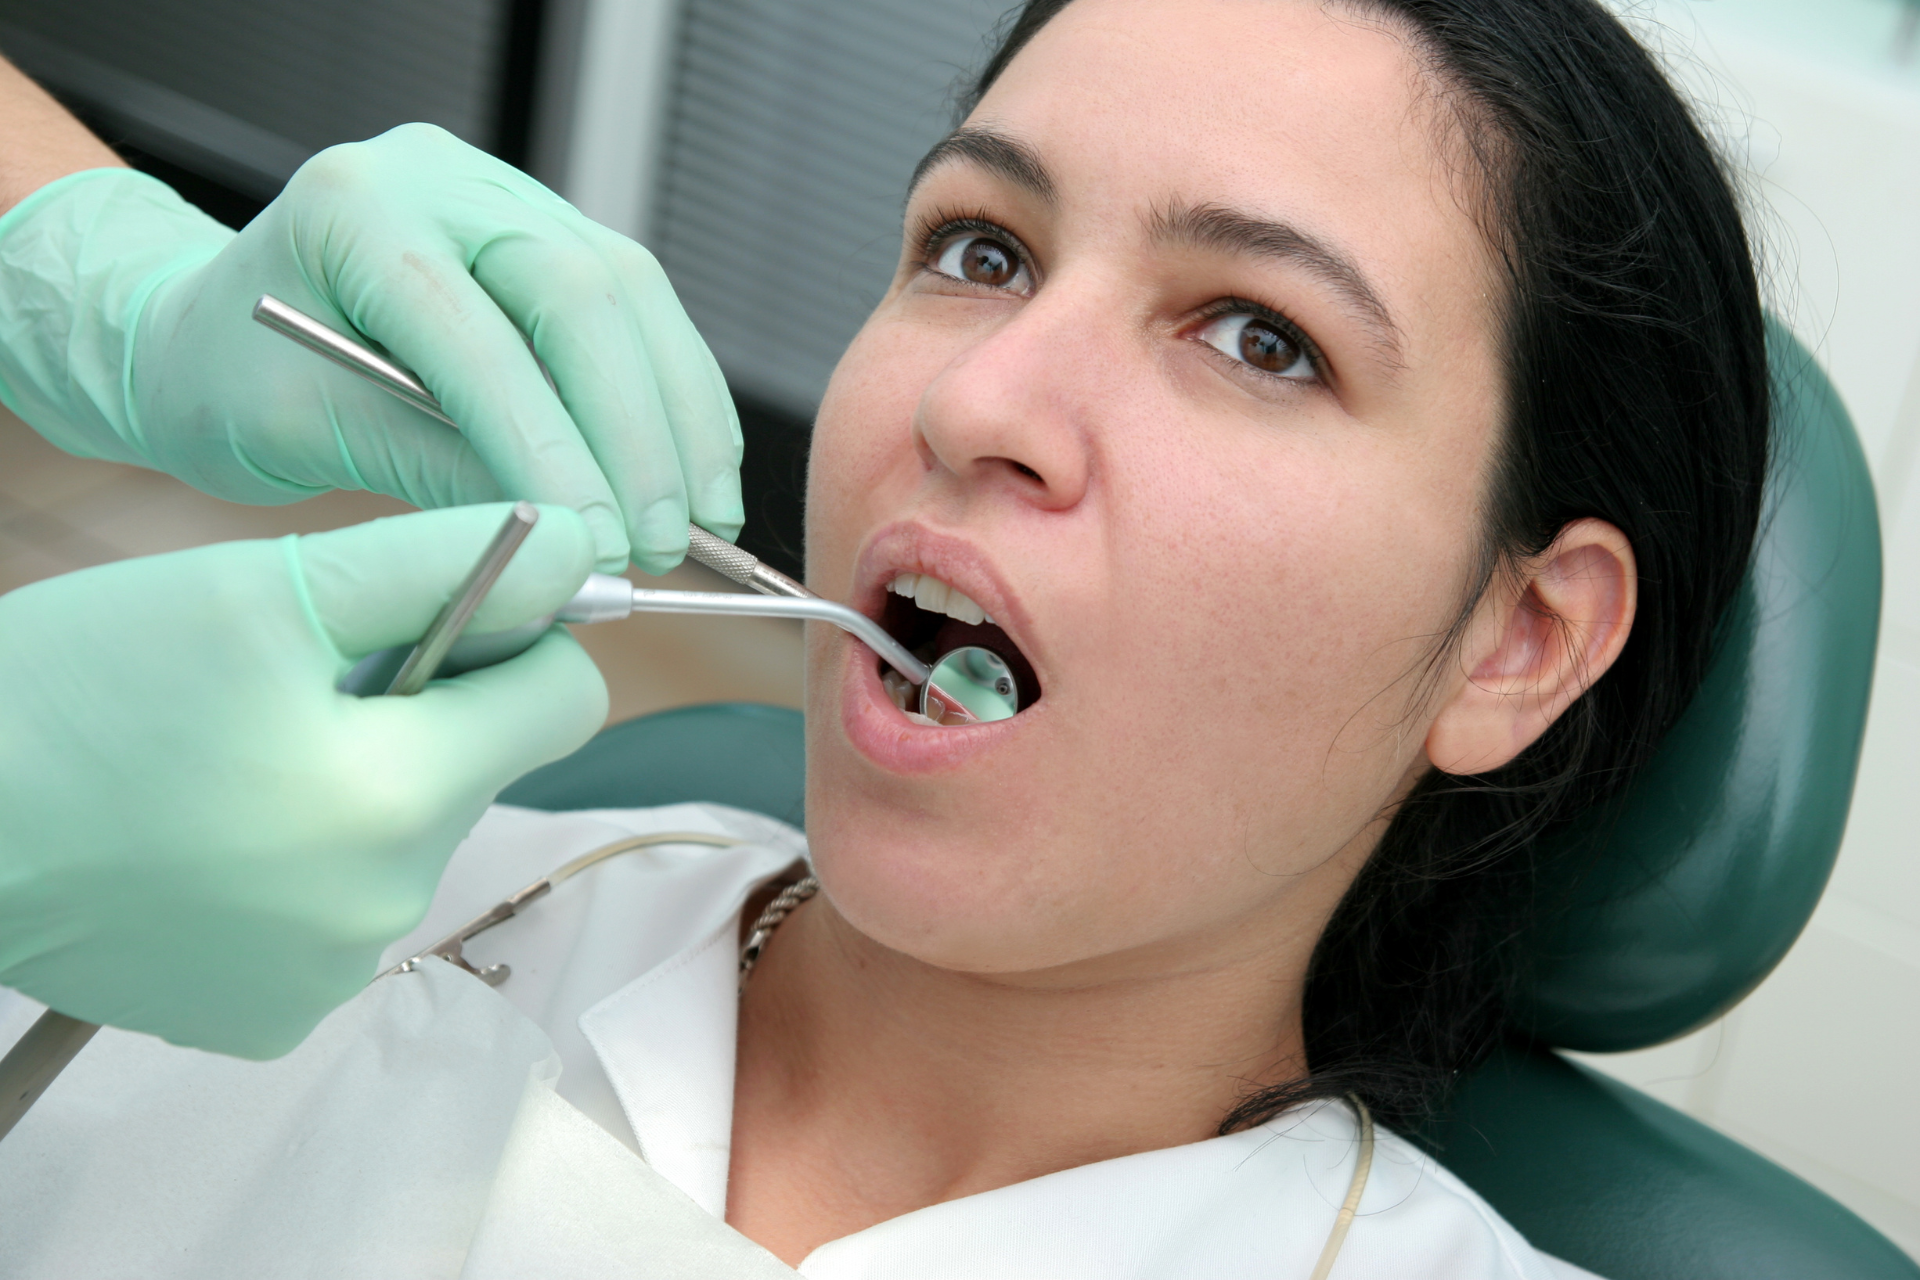 Dr. Escudero's 10 Top Tips to Cope with Dental Anxiety and Fear